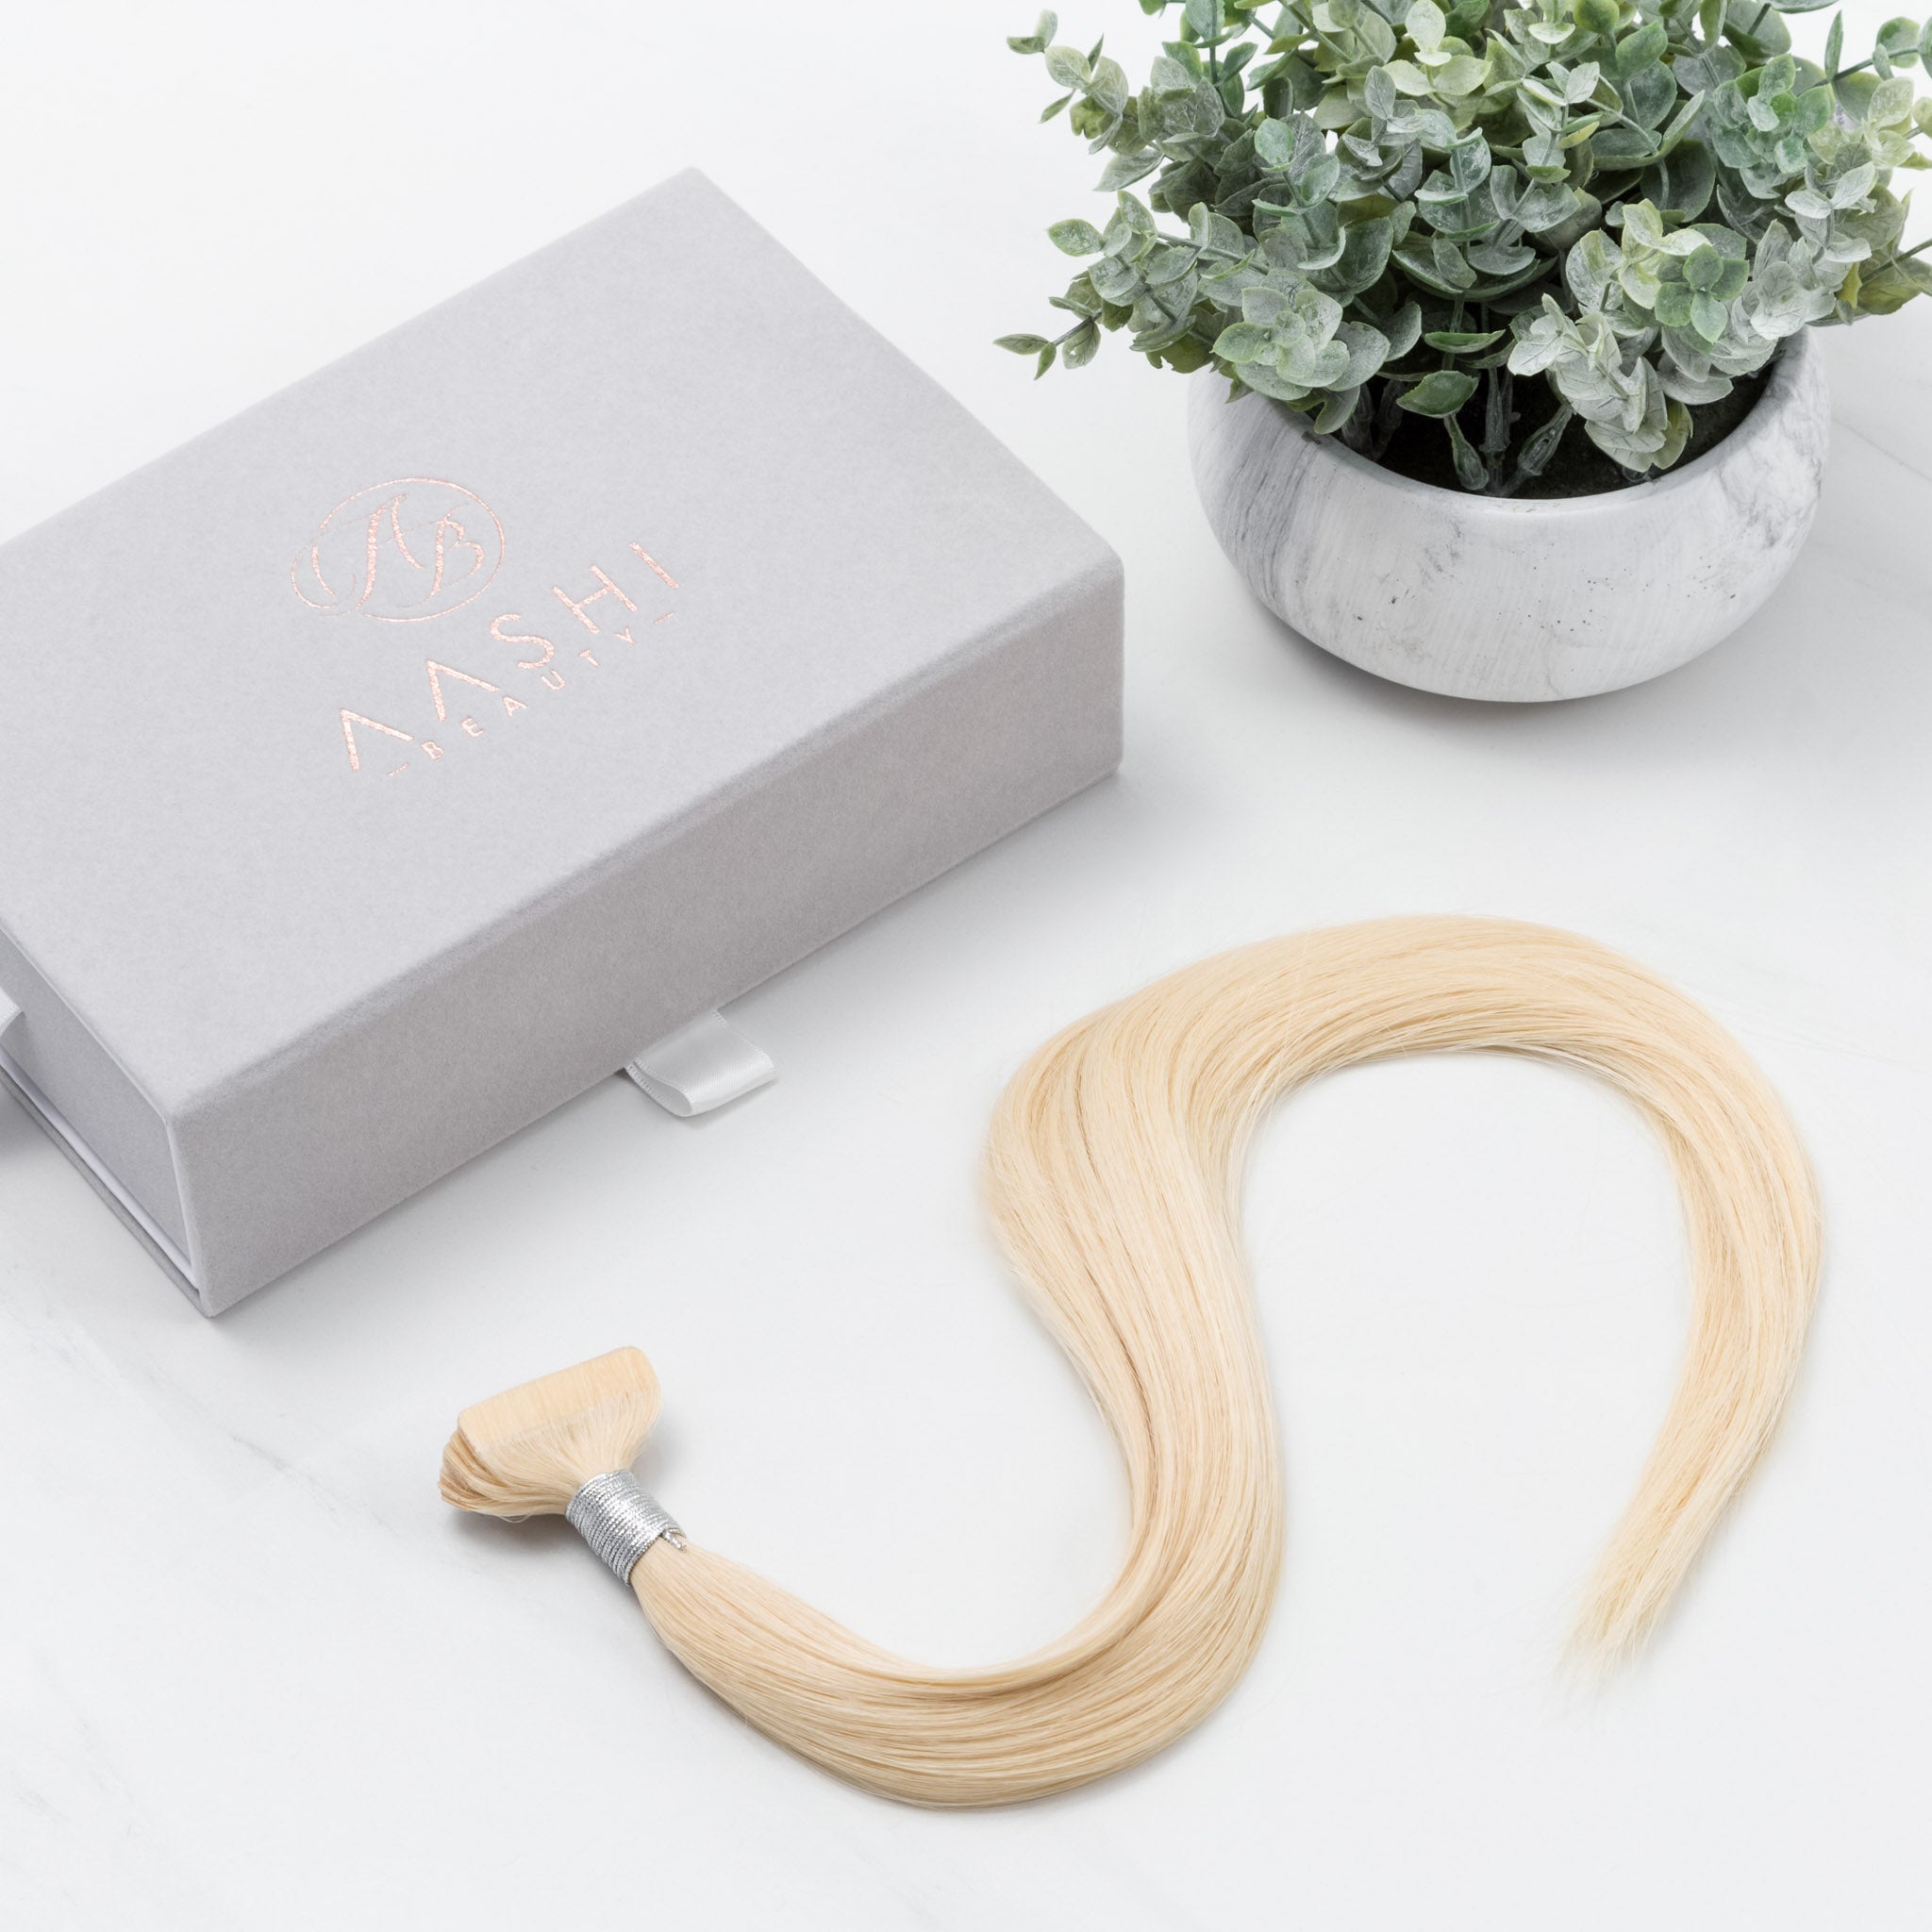 Ash Blonde (#60) Tape-In (Double Drawn THICK) - Aashi Beauty